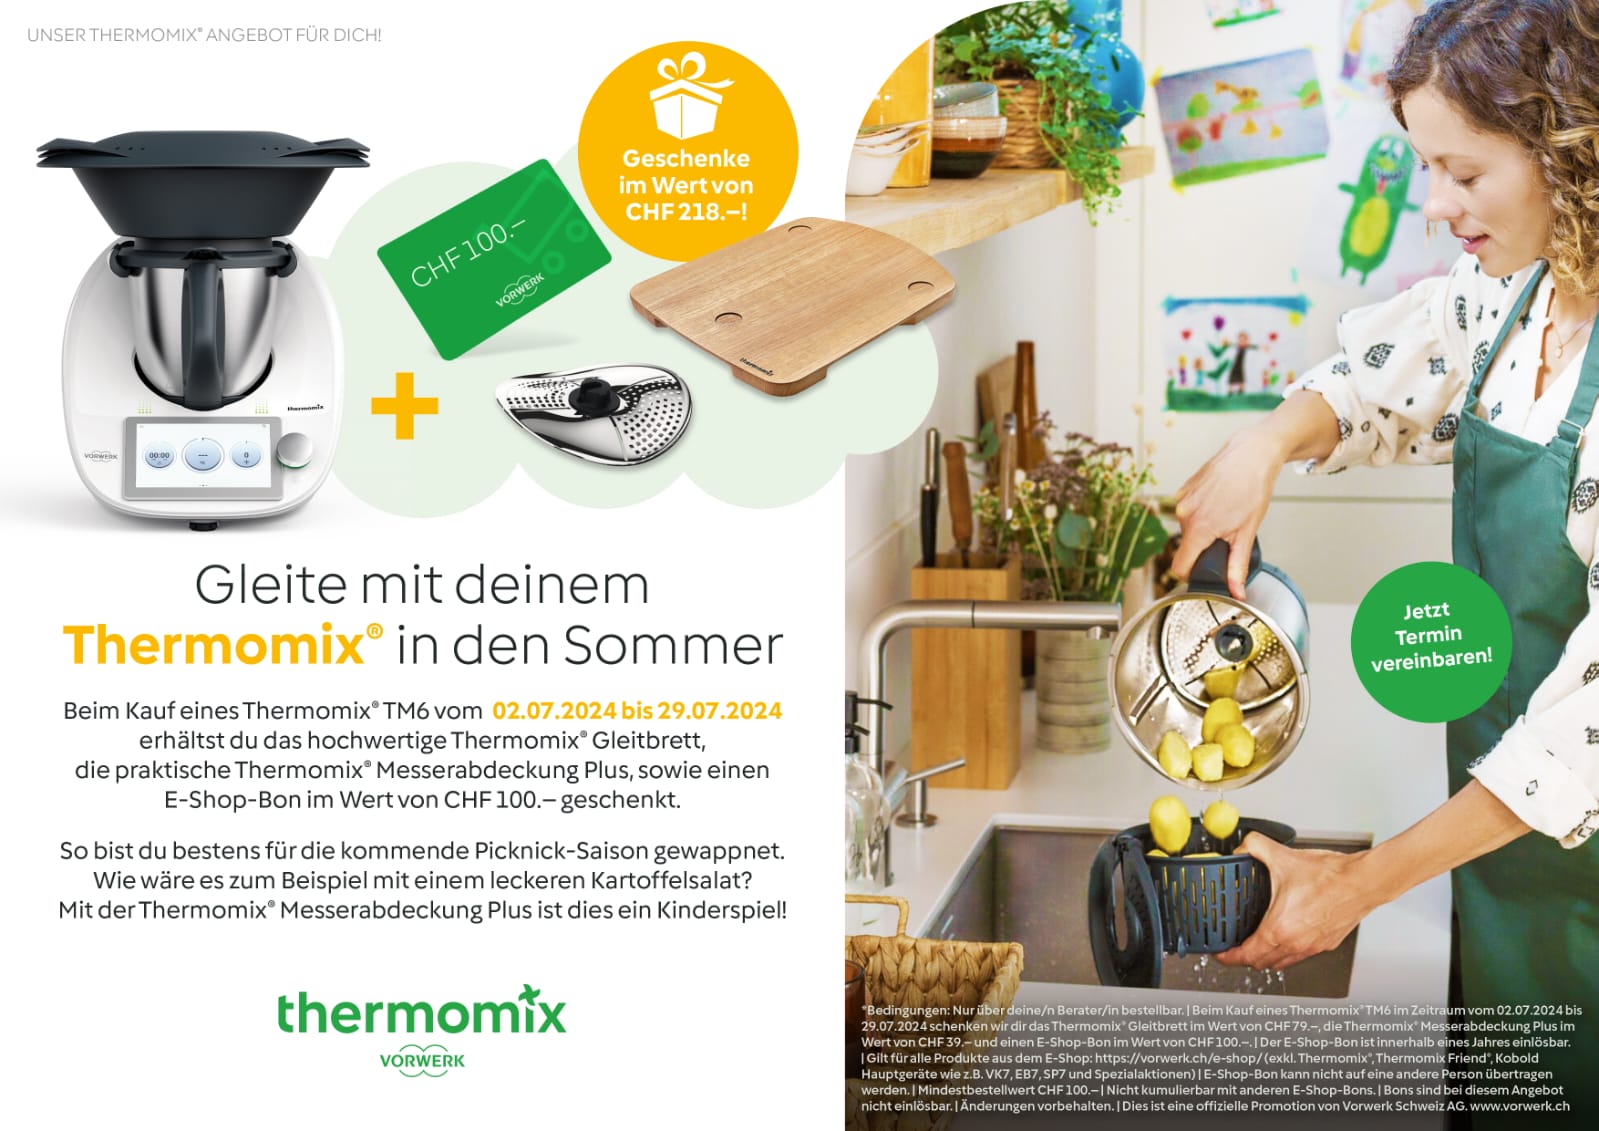 Thermomix Angebot, Promotion